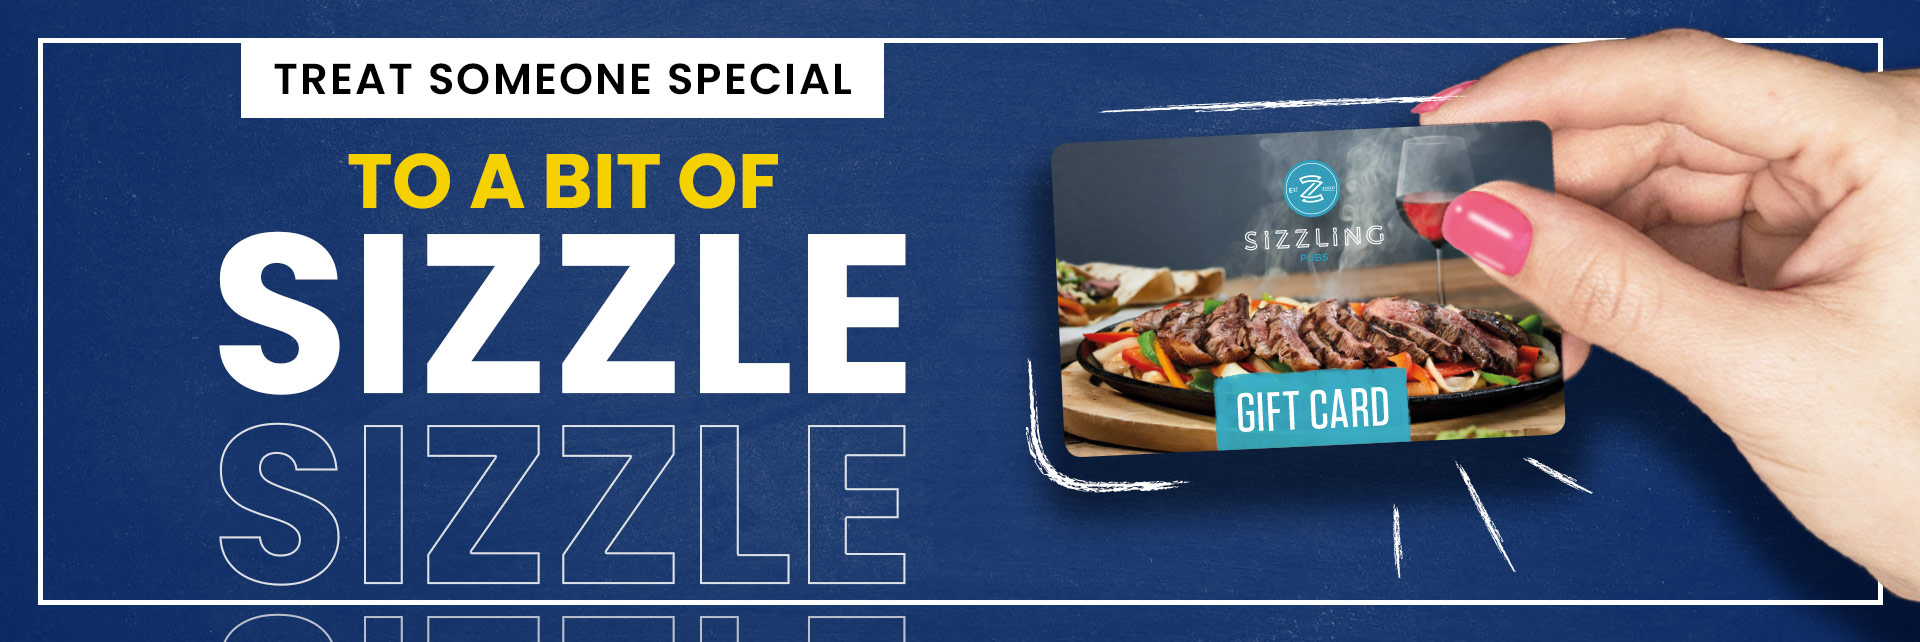 Sizzling Pubs Gift Card at The Grange Hotel in Sunderland